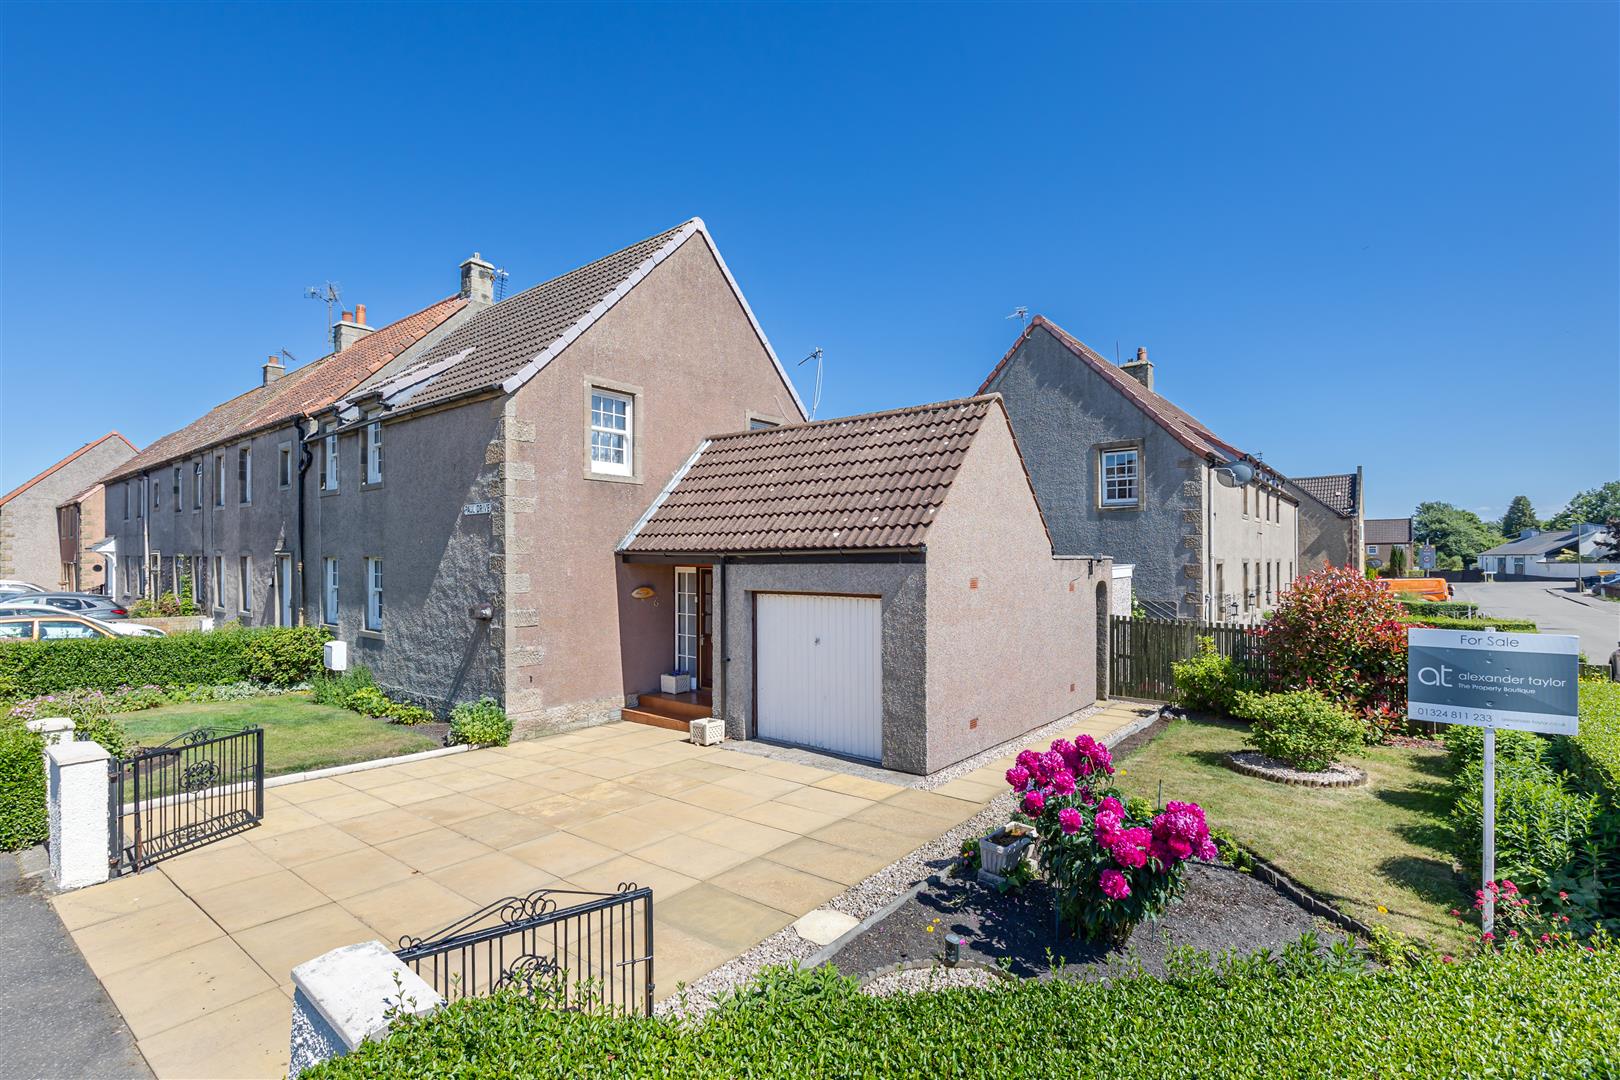 3 bed end of terrace house for sale in Paul Drive, Falkirk, FK2 